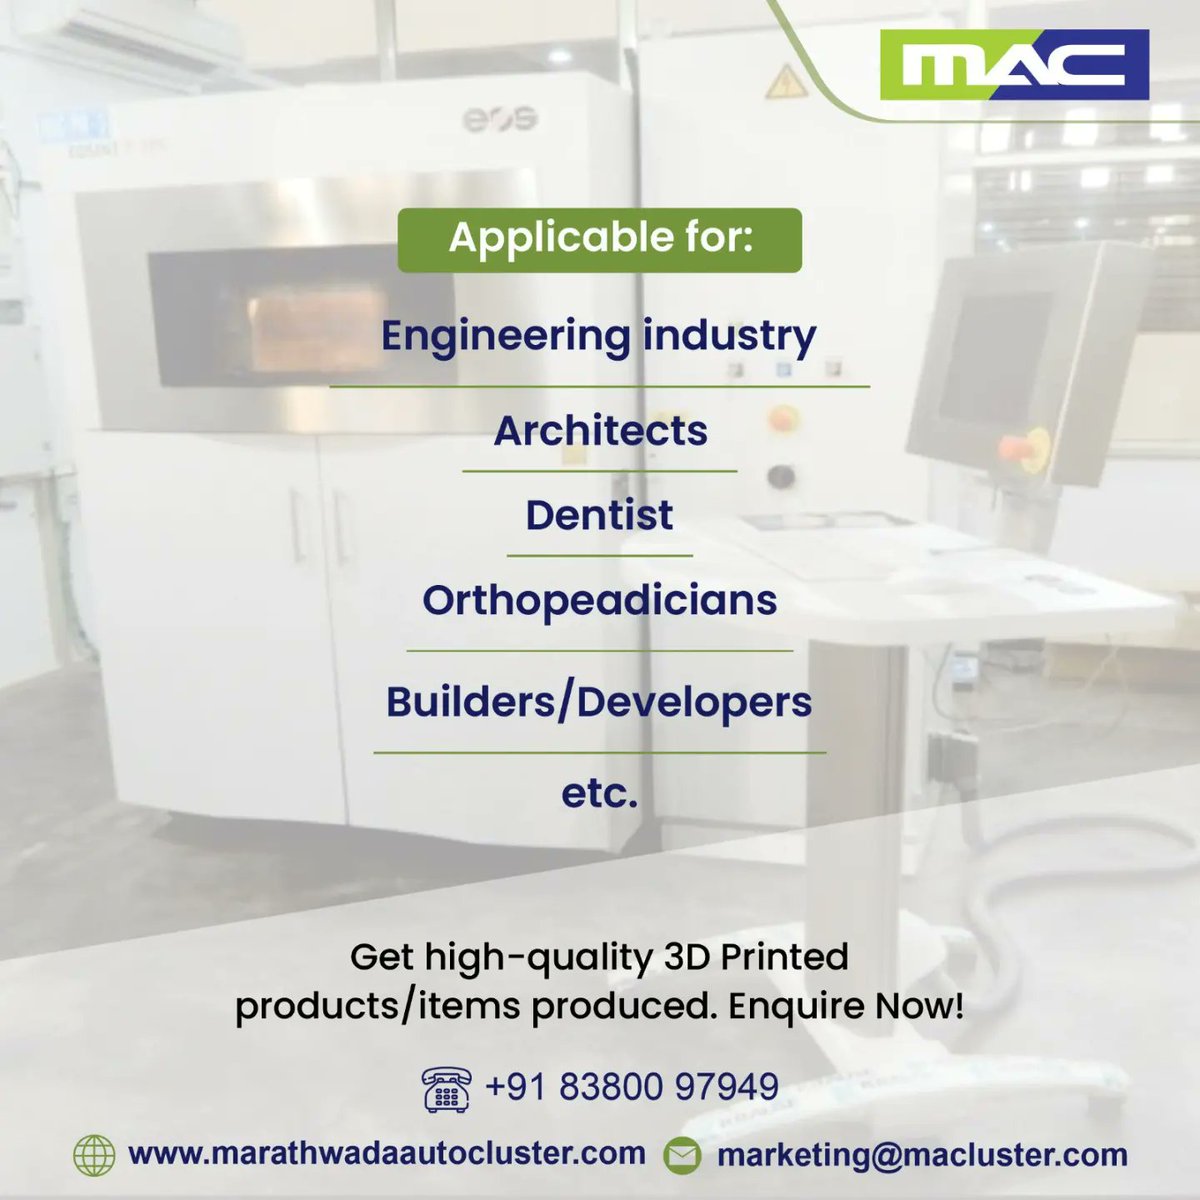 The perfect solution for your Rapid Prototyping needs. 

3D printing machine at #MAC to handle the production of your prototypes at a reasonable price. It requires less effort and saves product development time.

Enquire now!

#3Dprinting #RPT #RapidPrototyping #productdesigning